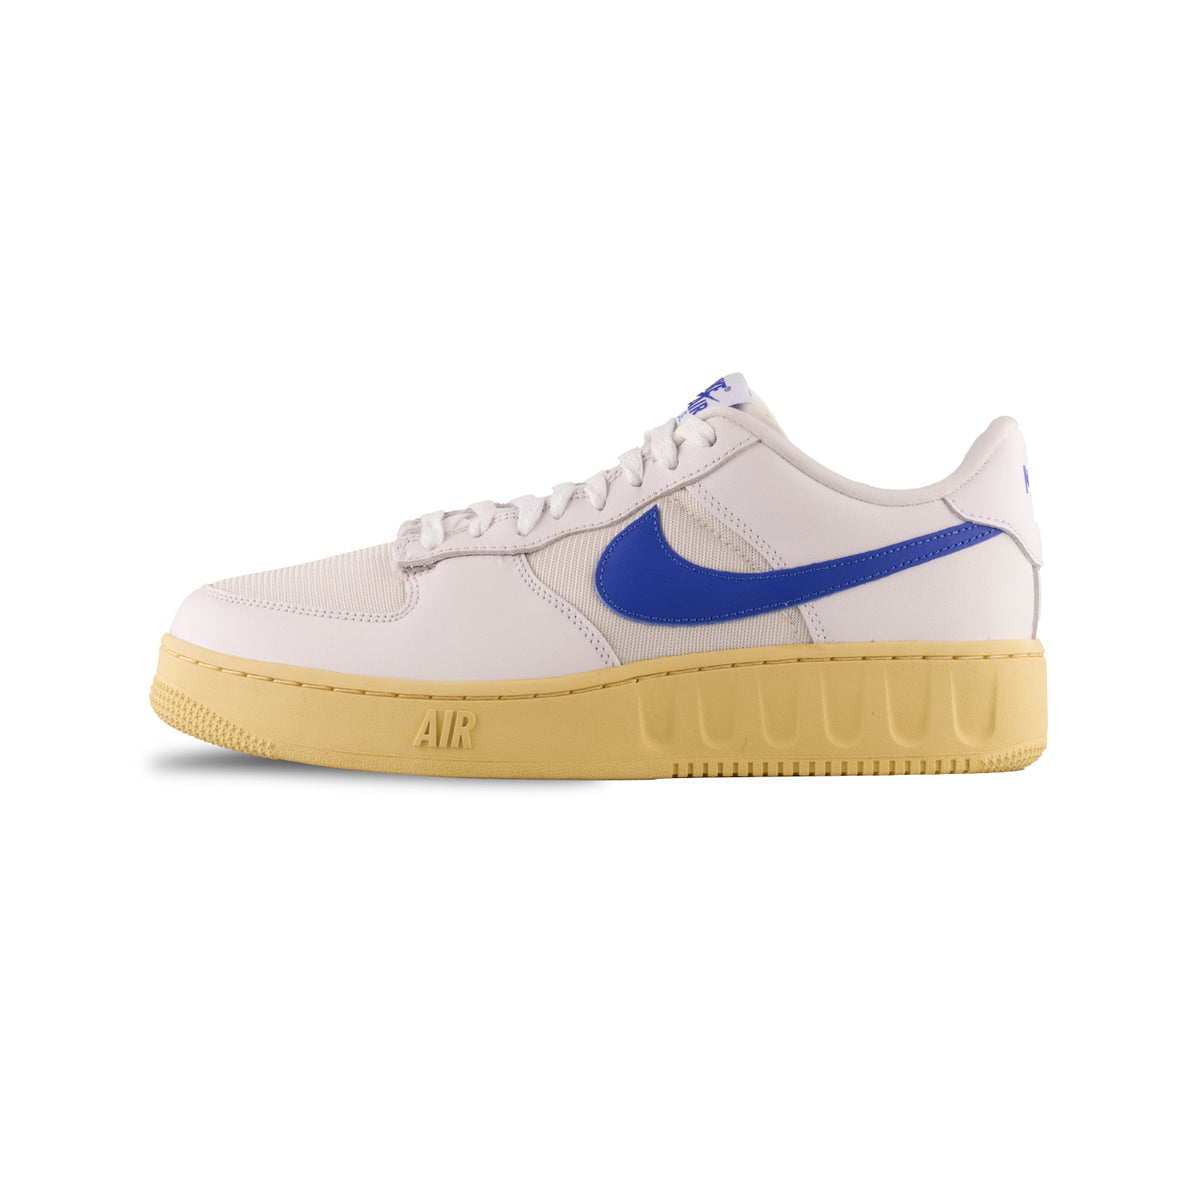 Nike Air Force 1 Low Utility Mens Trainers DM2385